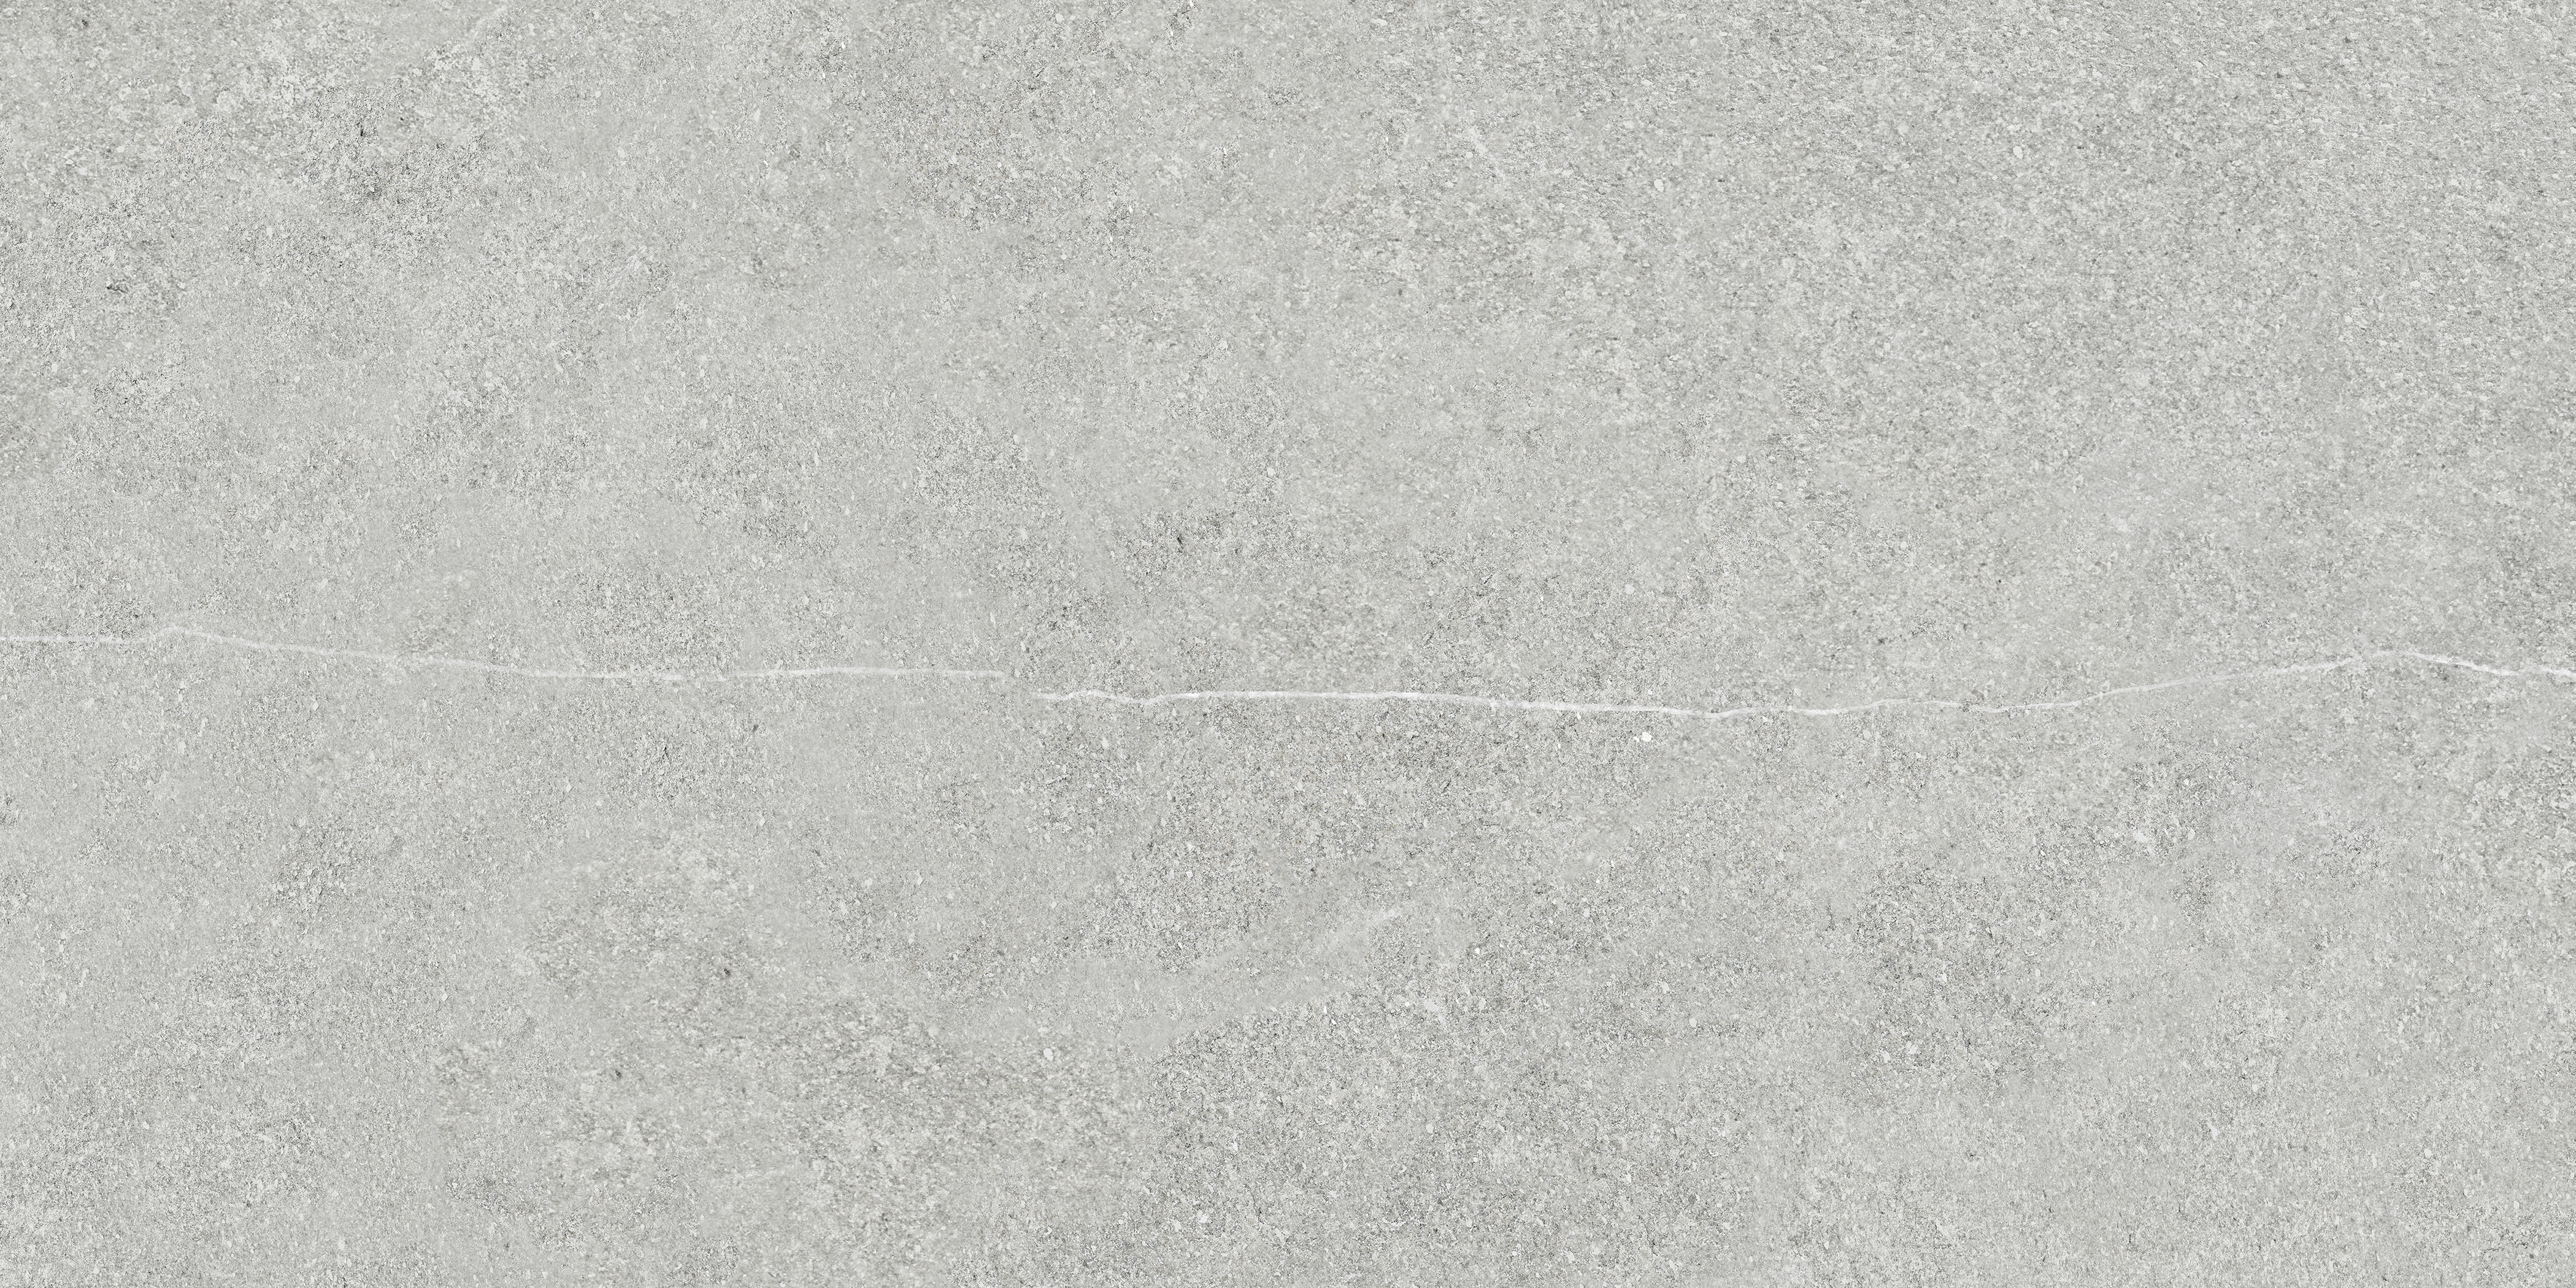 ash pattern color body porcelain field tile from mjork anatolia collection distributed by surface group international matte finish rectified edge 12x24 rectangle shape